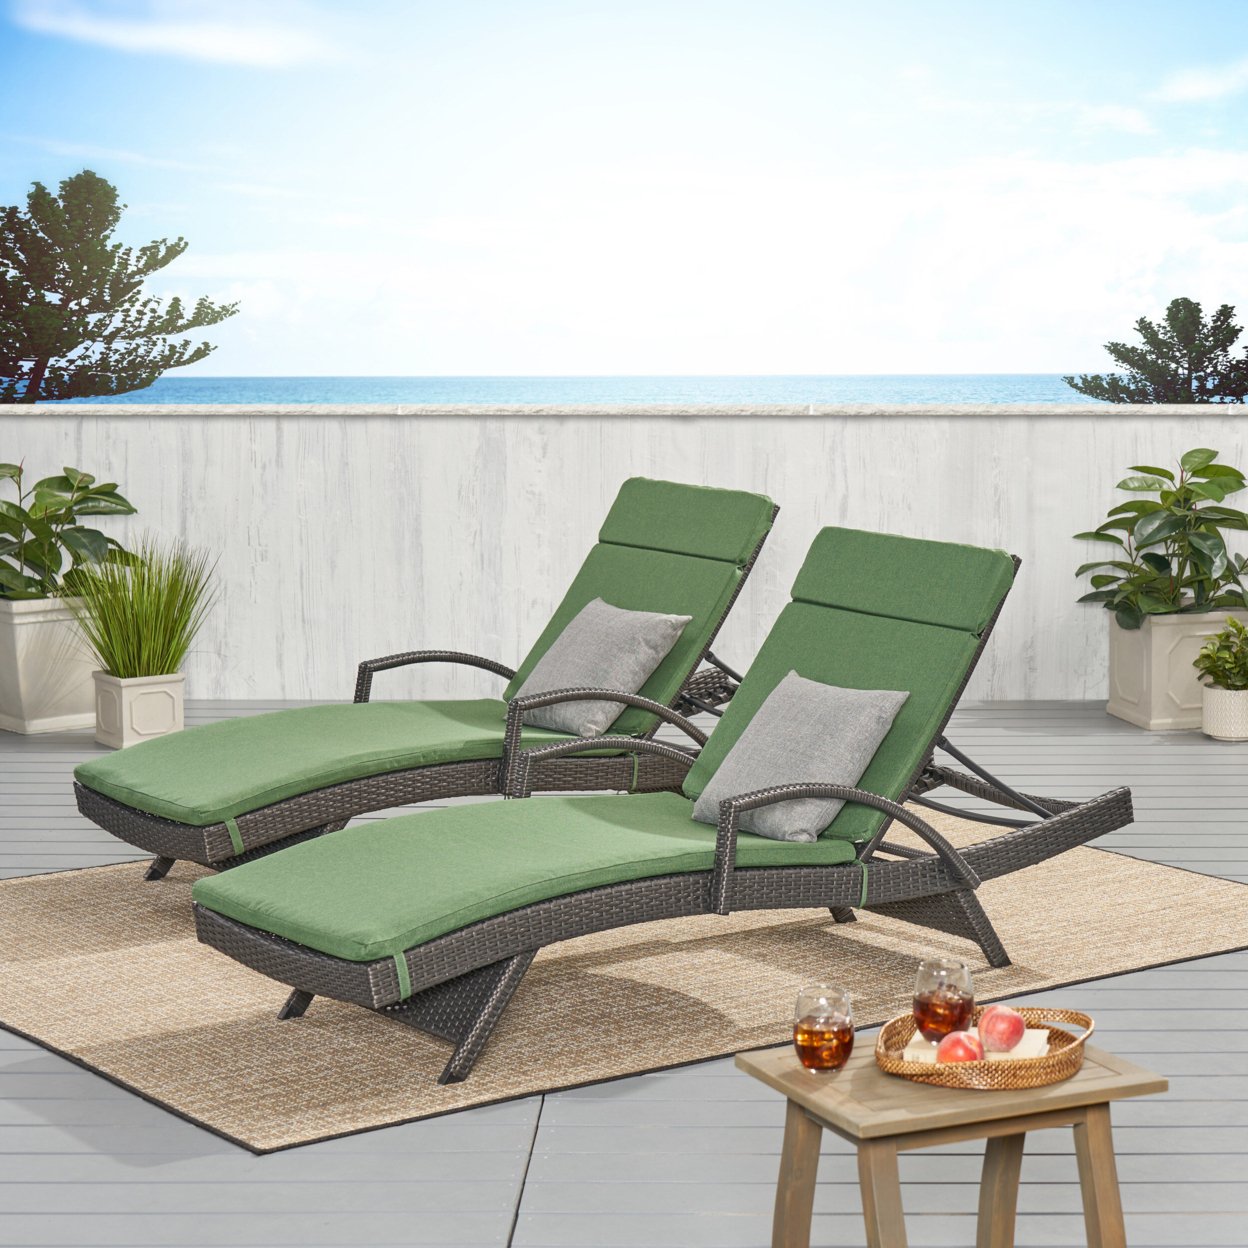 Soleil Outdoor Wicker Chaise Lounges With Water Resistant Cushions (Set Of 2) - Jungle Green